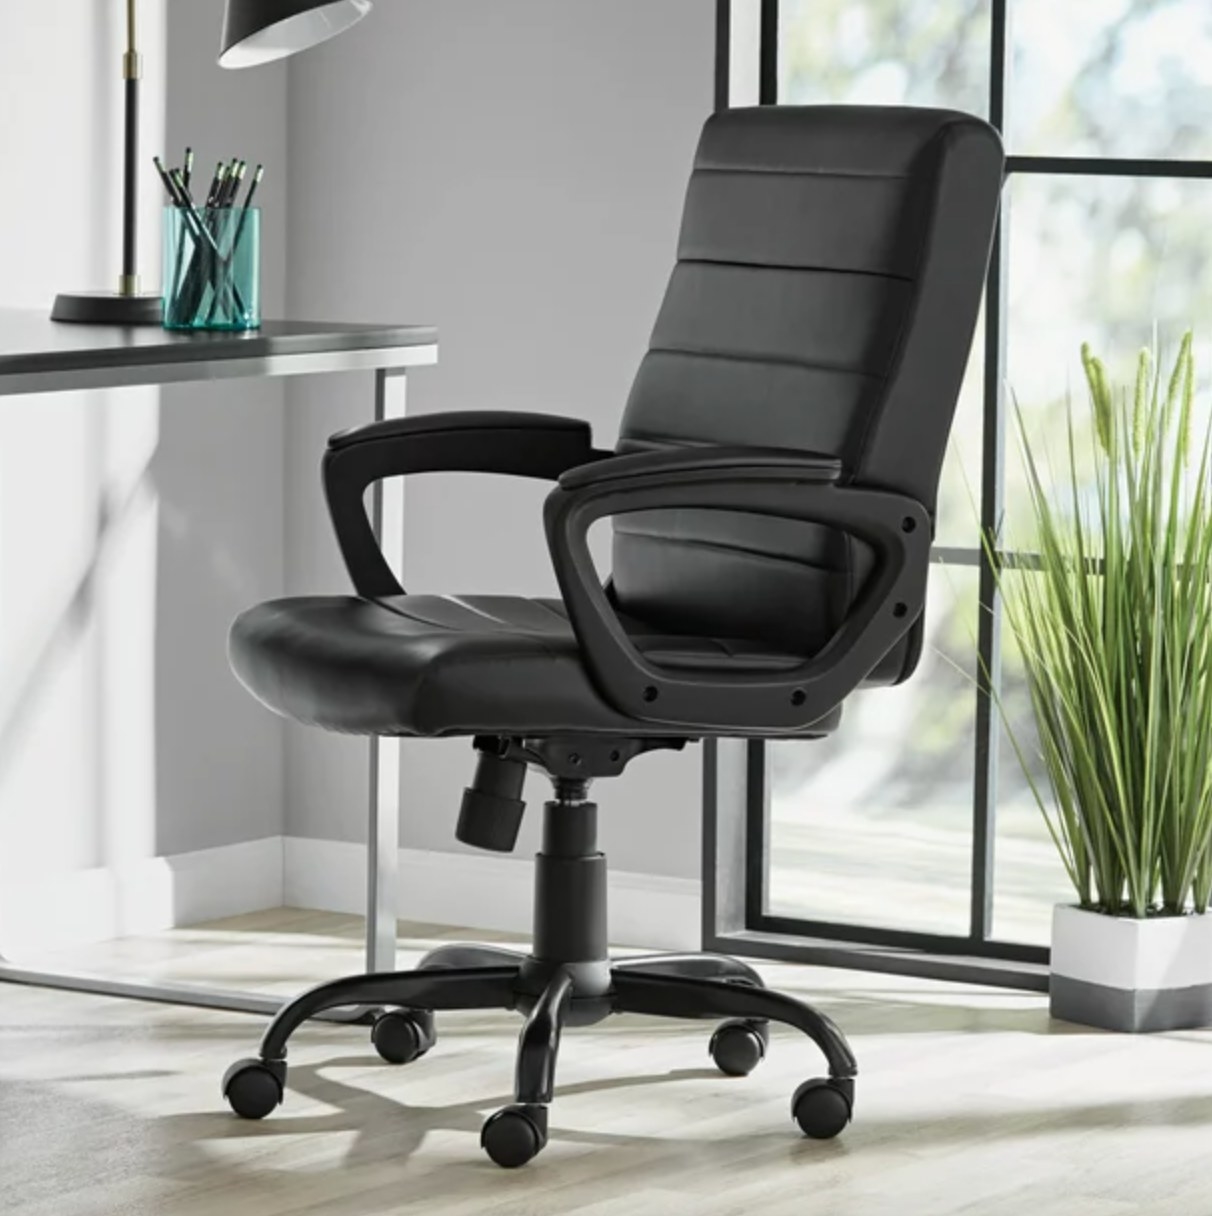 the black office chair with high cushioned back